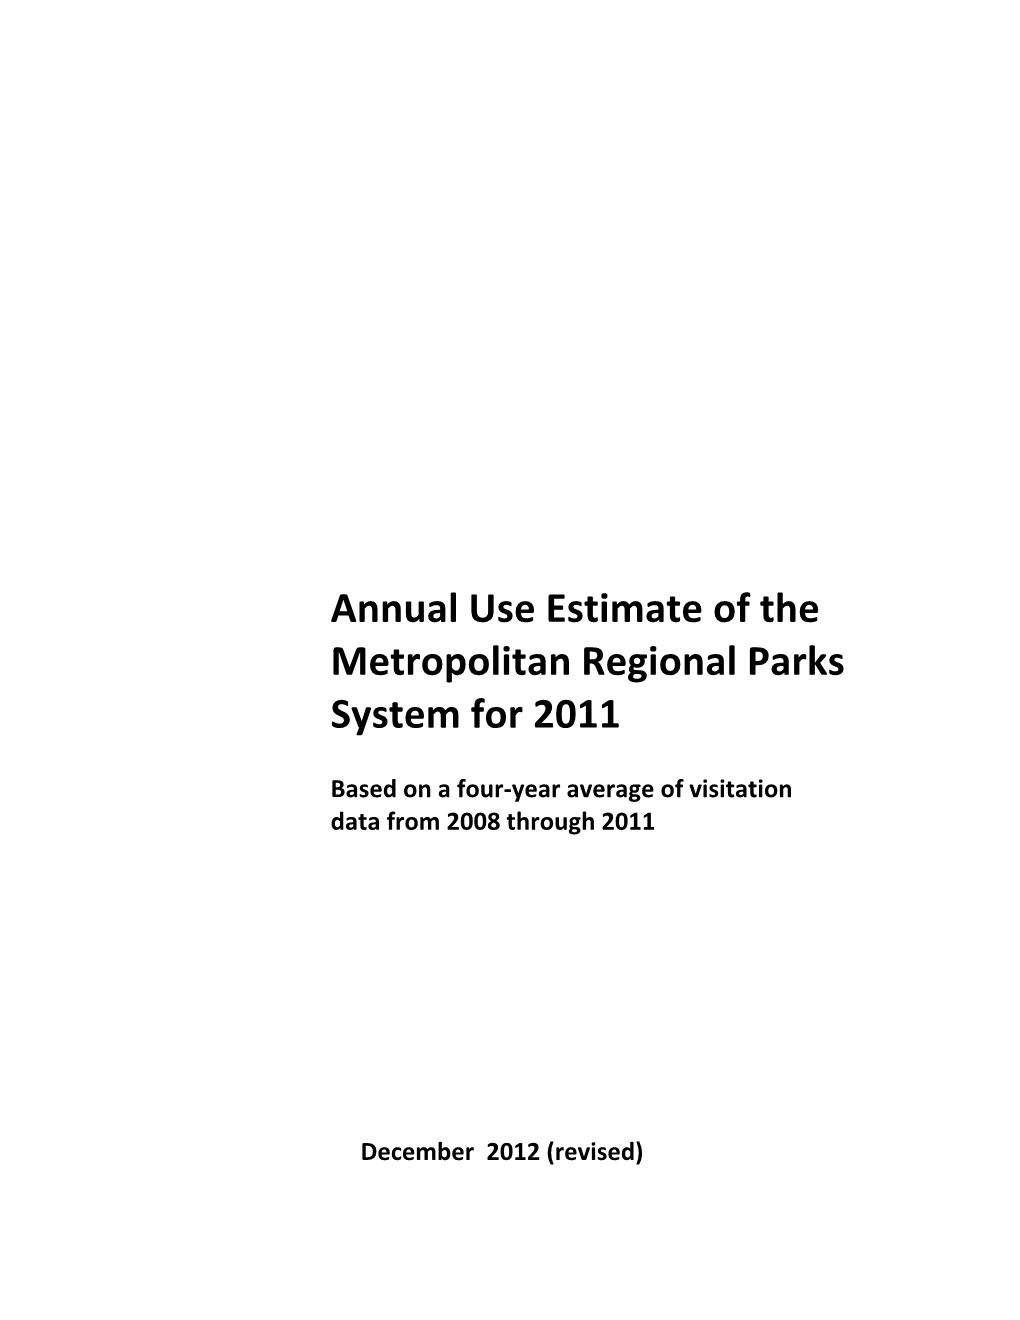 2011 Annual Use Estimate of the Regional Parks System